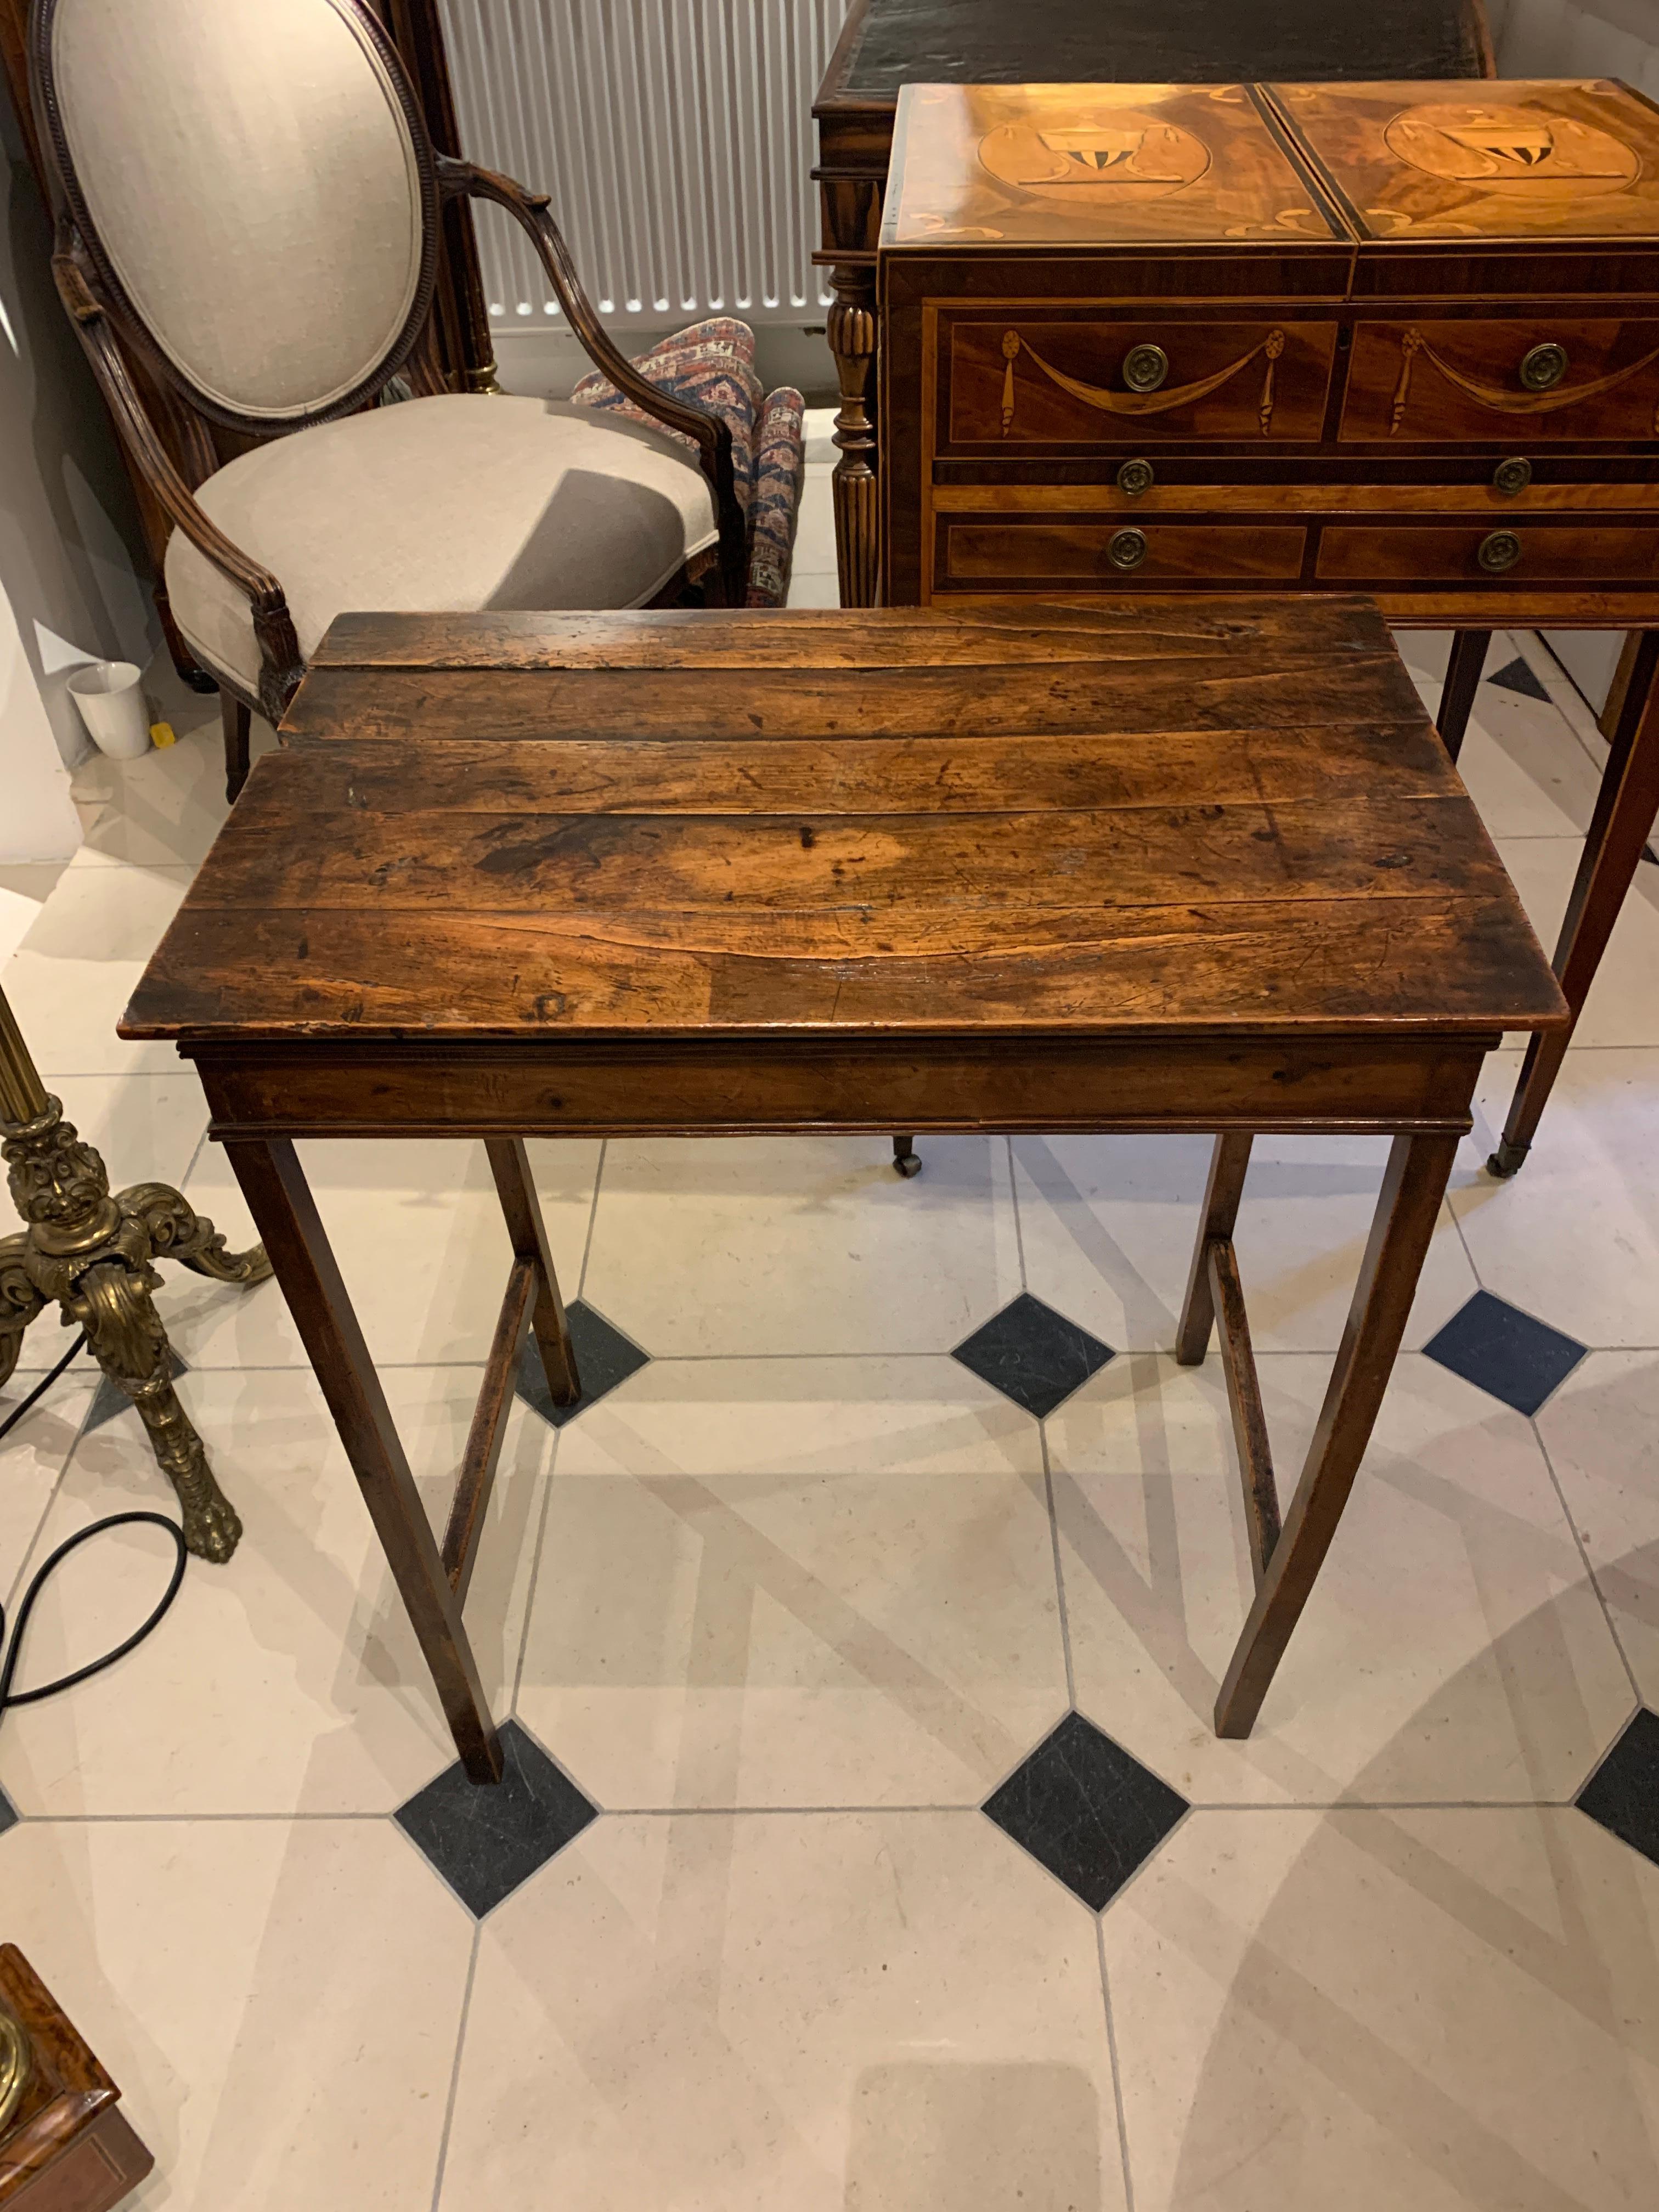 Small Yew Wood Multi Plank Provincial Occasional Table  with charming slightly bowed legs.
c. 1790